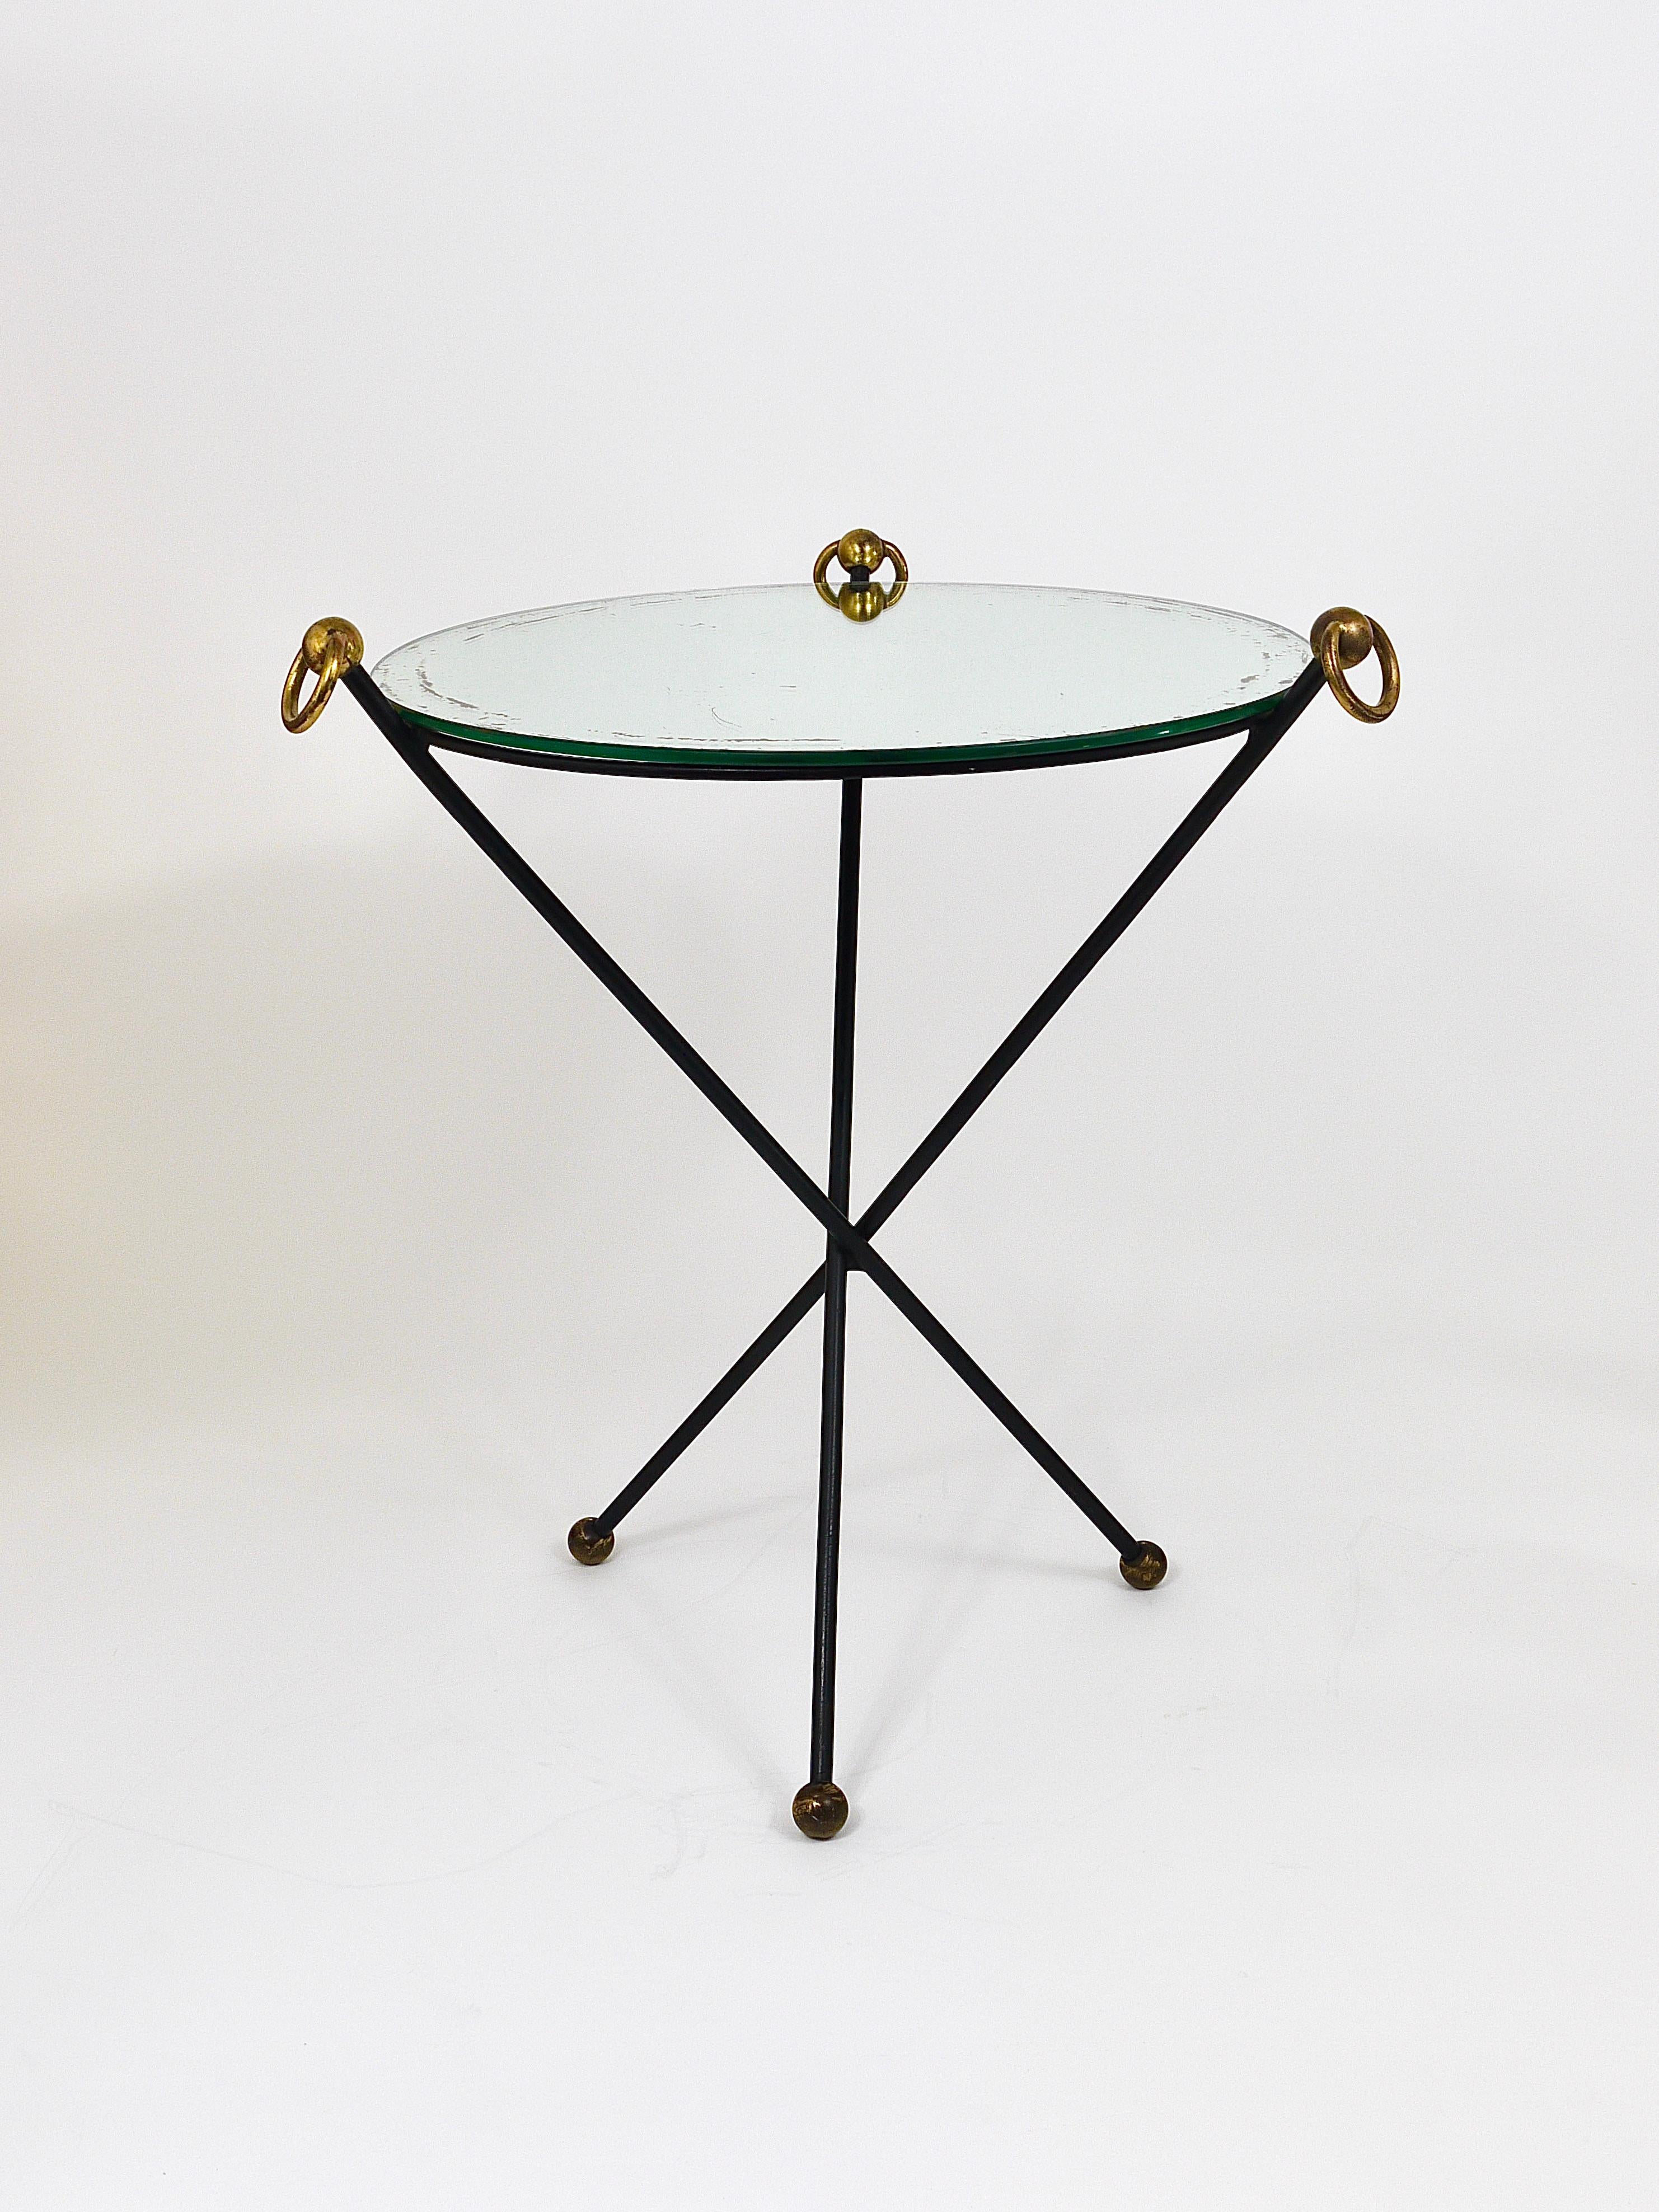 French Mid-Century Modern Mirror Side Table, Jacques Adnet Style, Brass, 1950s For Sale 5